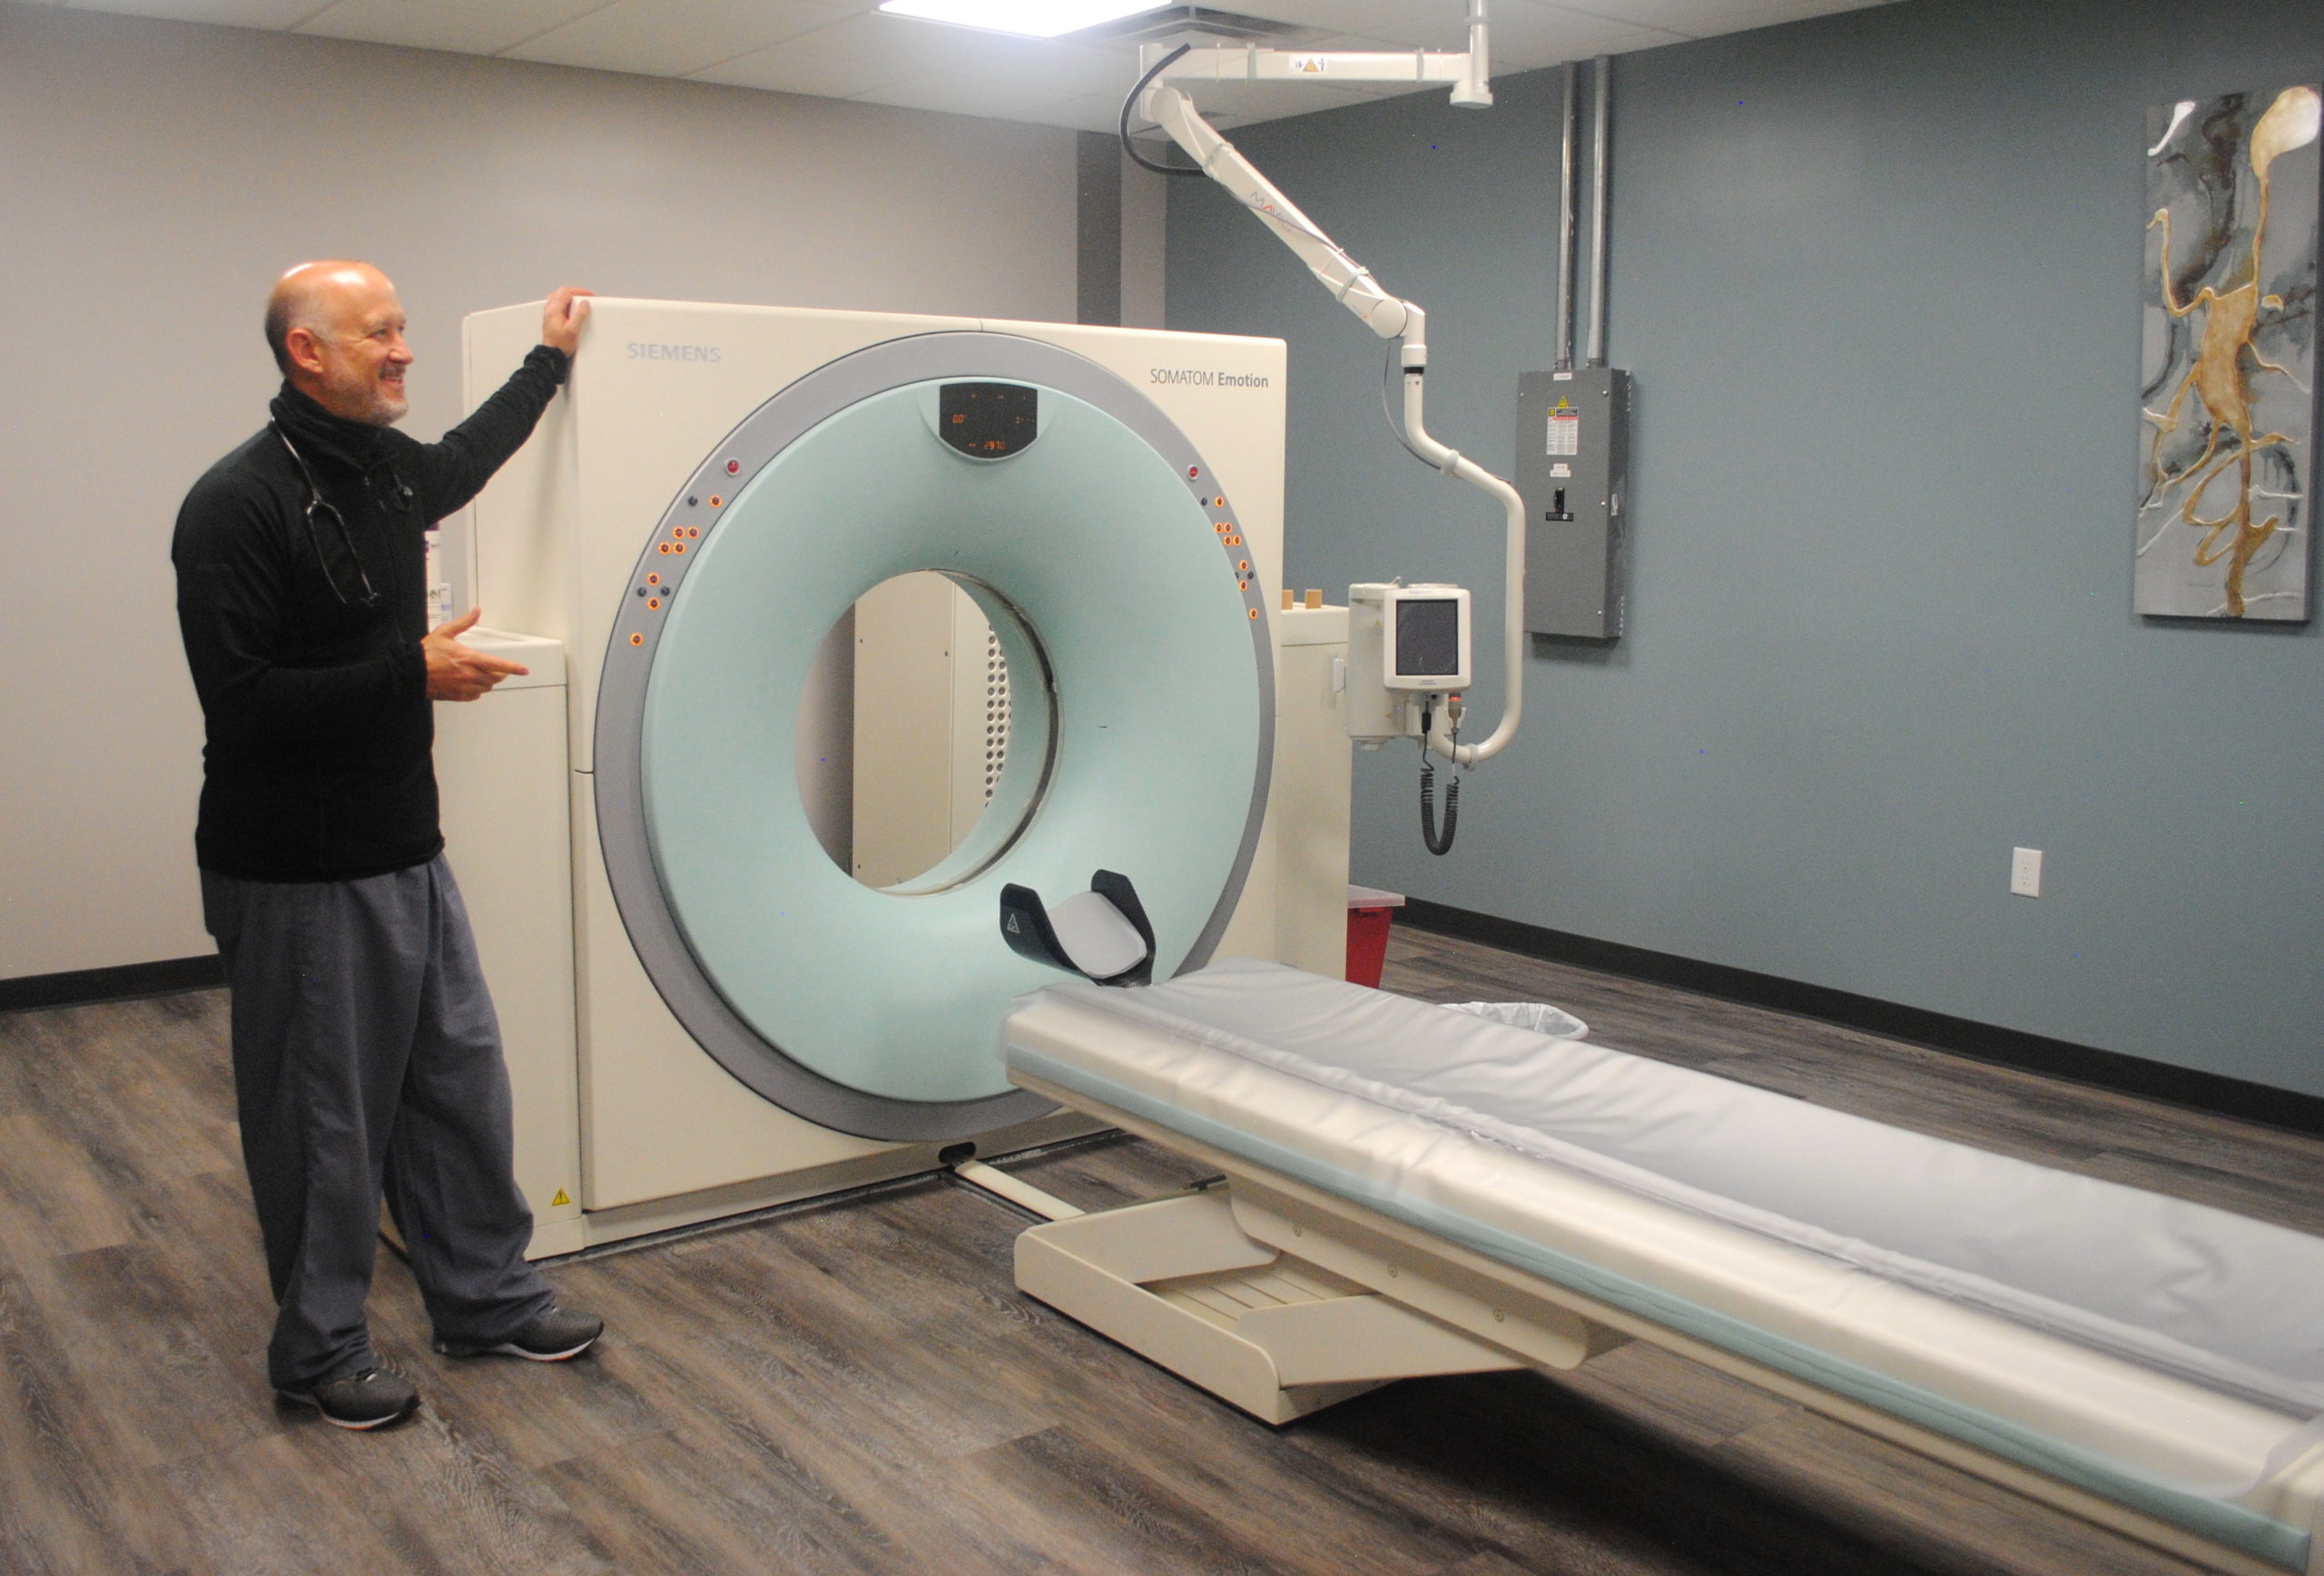 Dr. Mike standing next to CT scan machine